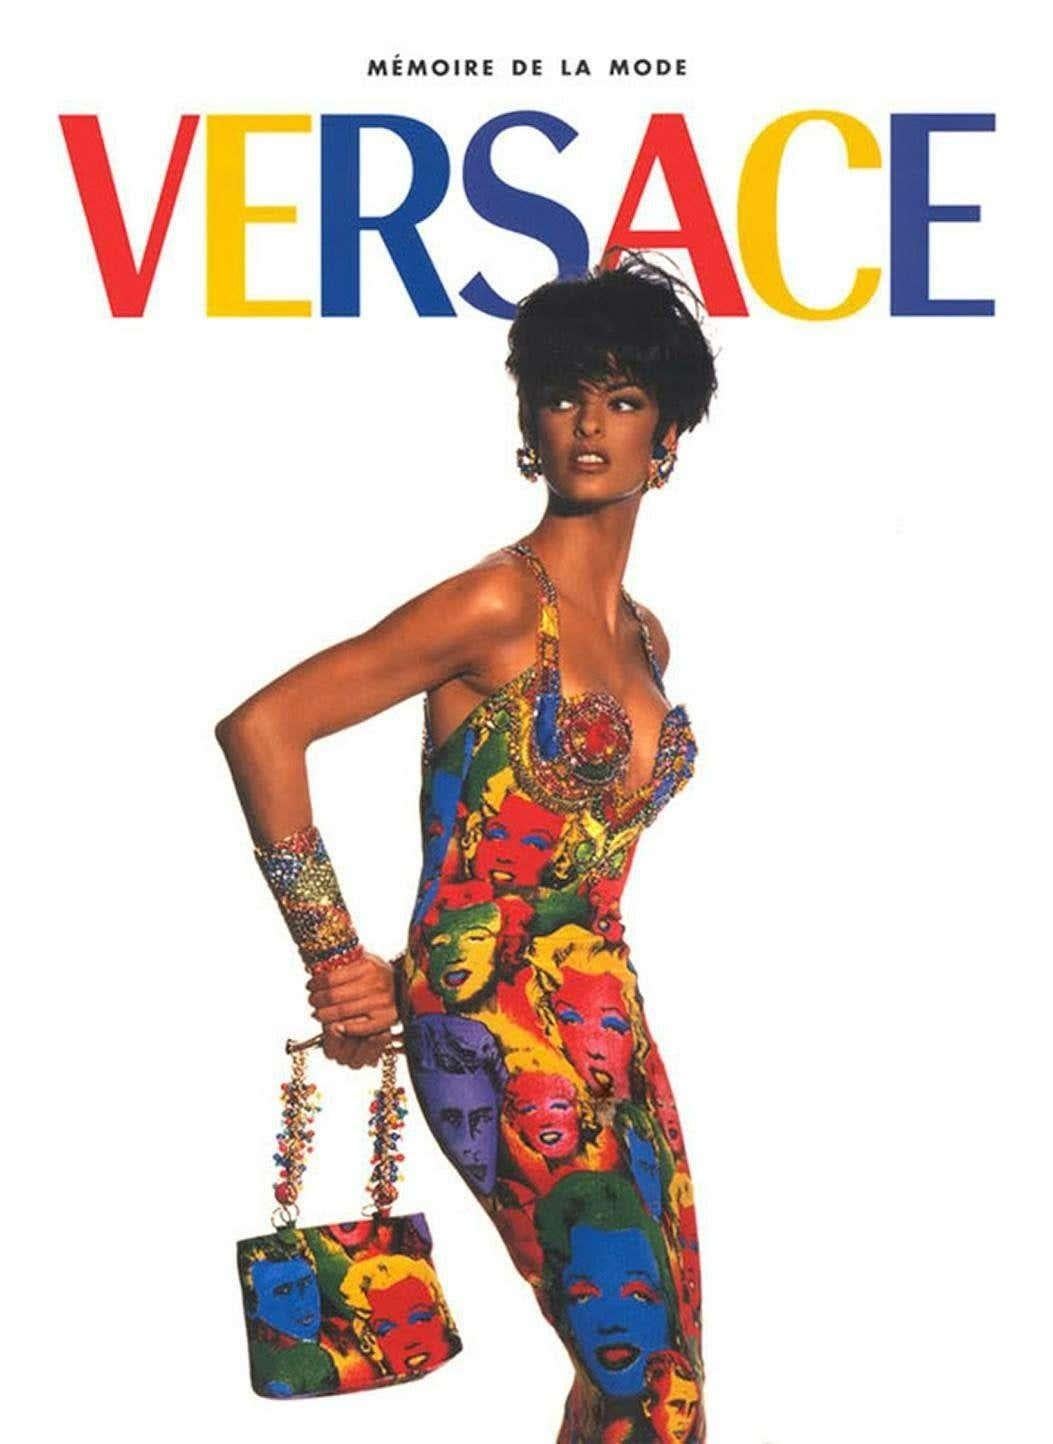 TheRealList presents: an iconic Marilyn Monroe and James Dean pop art Gianni Versace Couture crossbody, designed by Gianni Versace. From the Spring/Summer 1991 collection, this collection was heavily influenced by Warhol’s use of iconography from